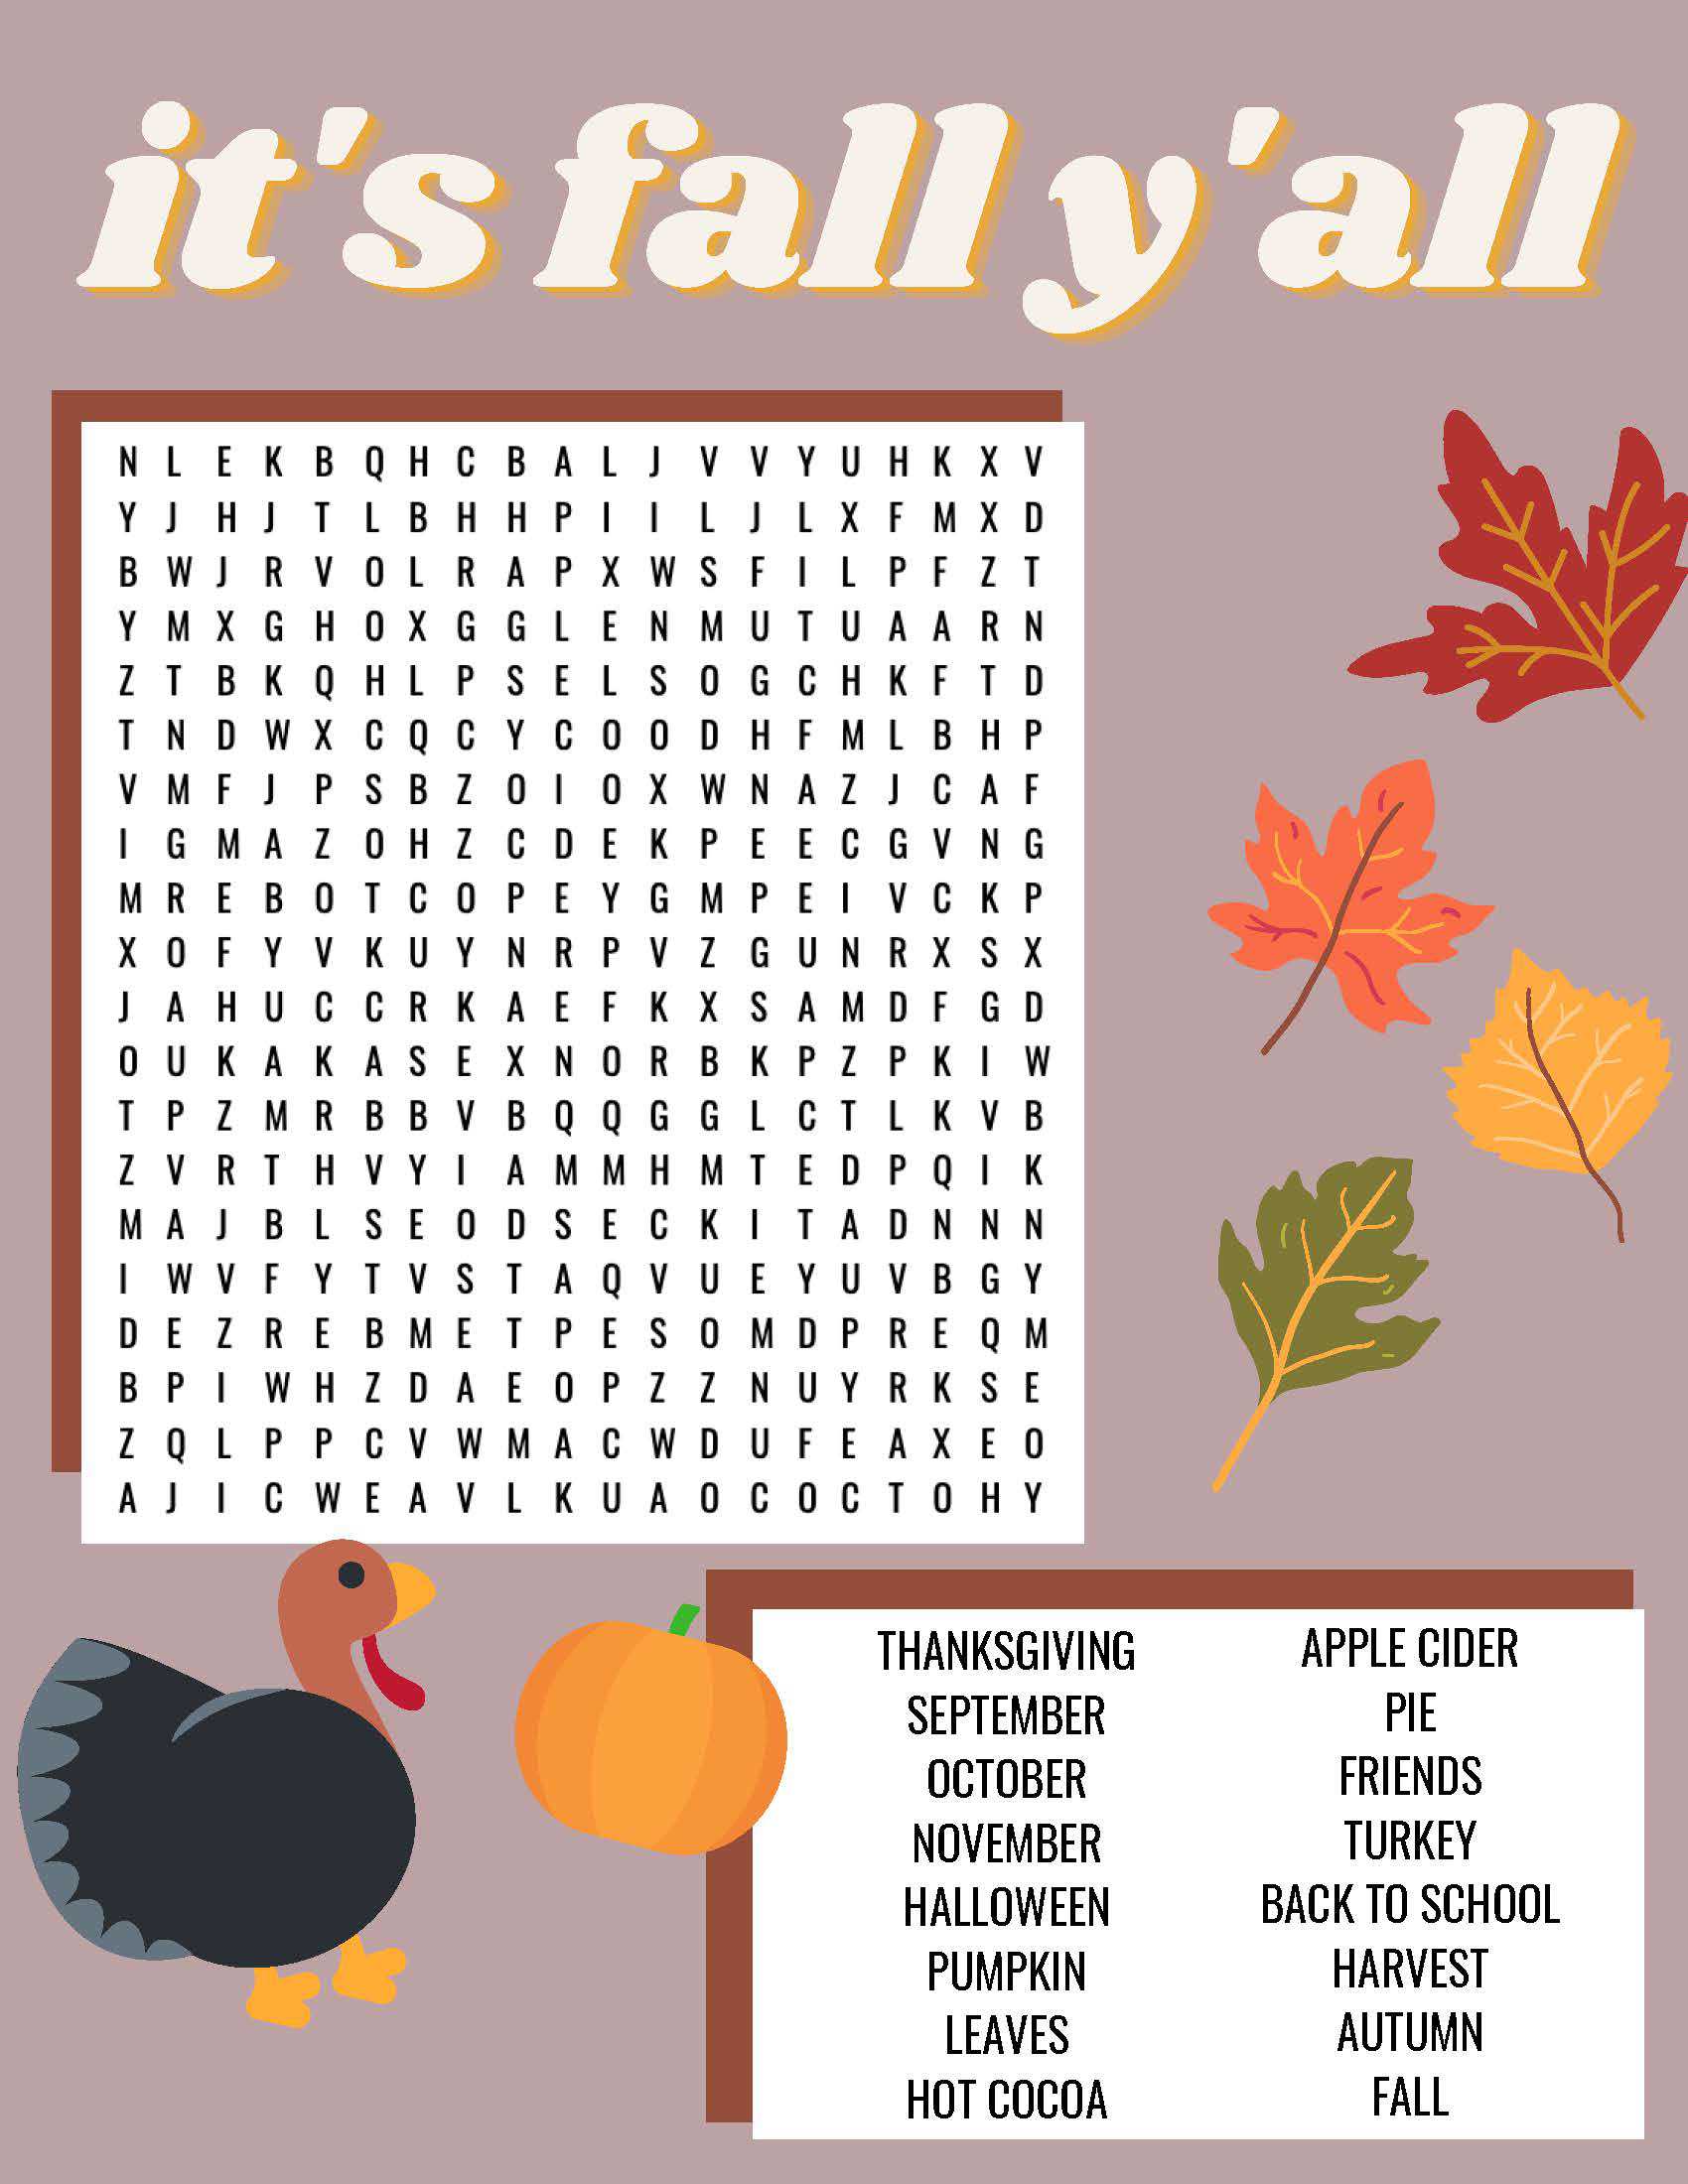 Link to download 'it's fall y'all' word search.